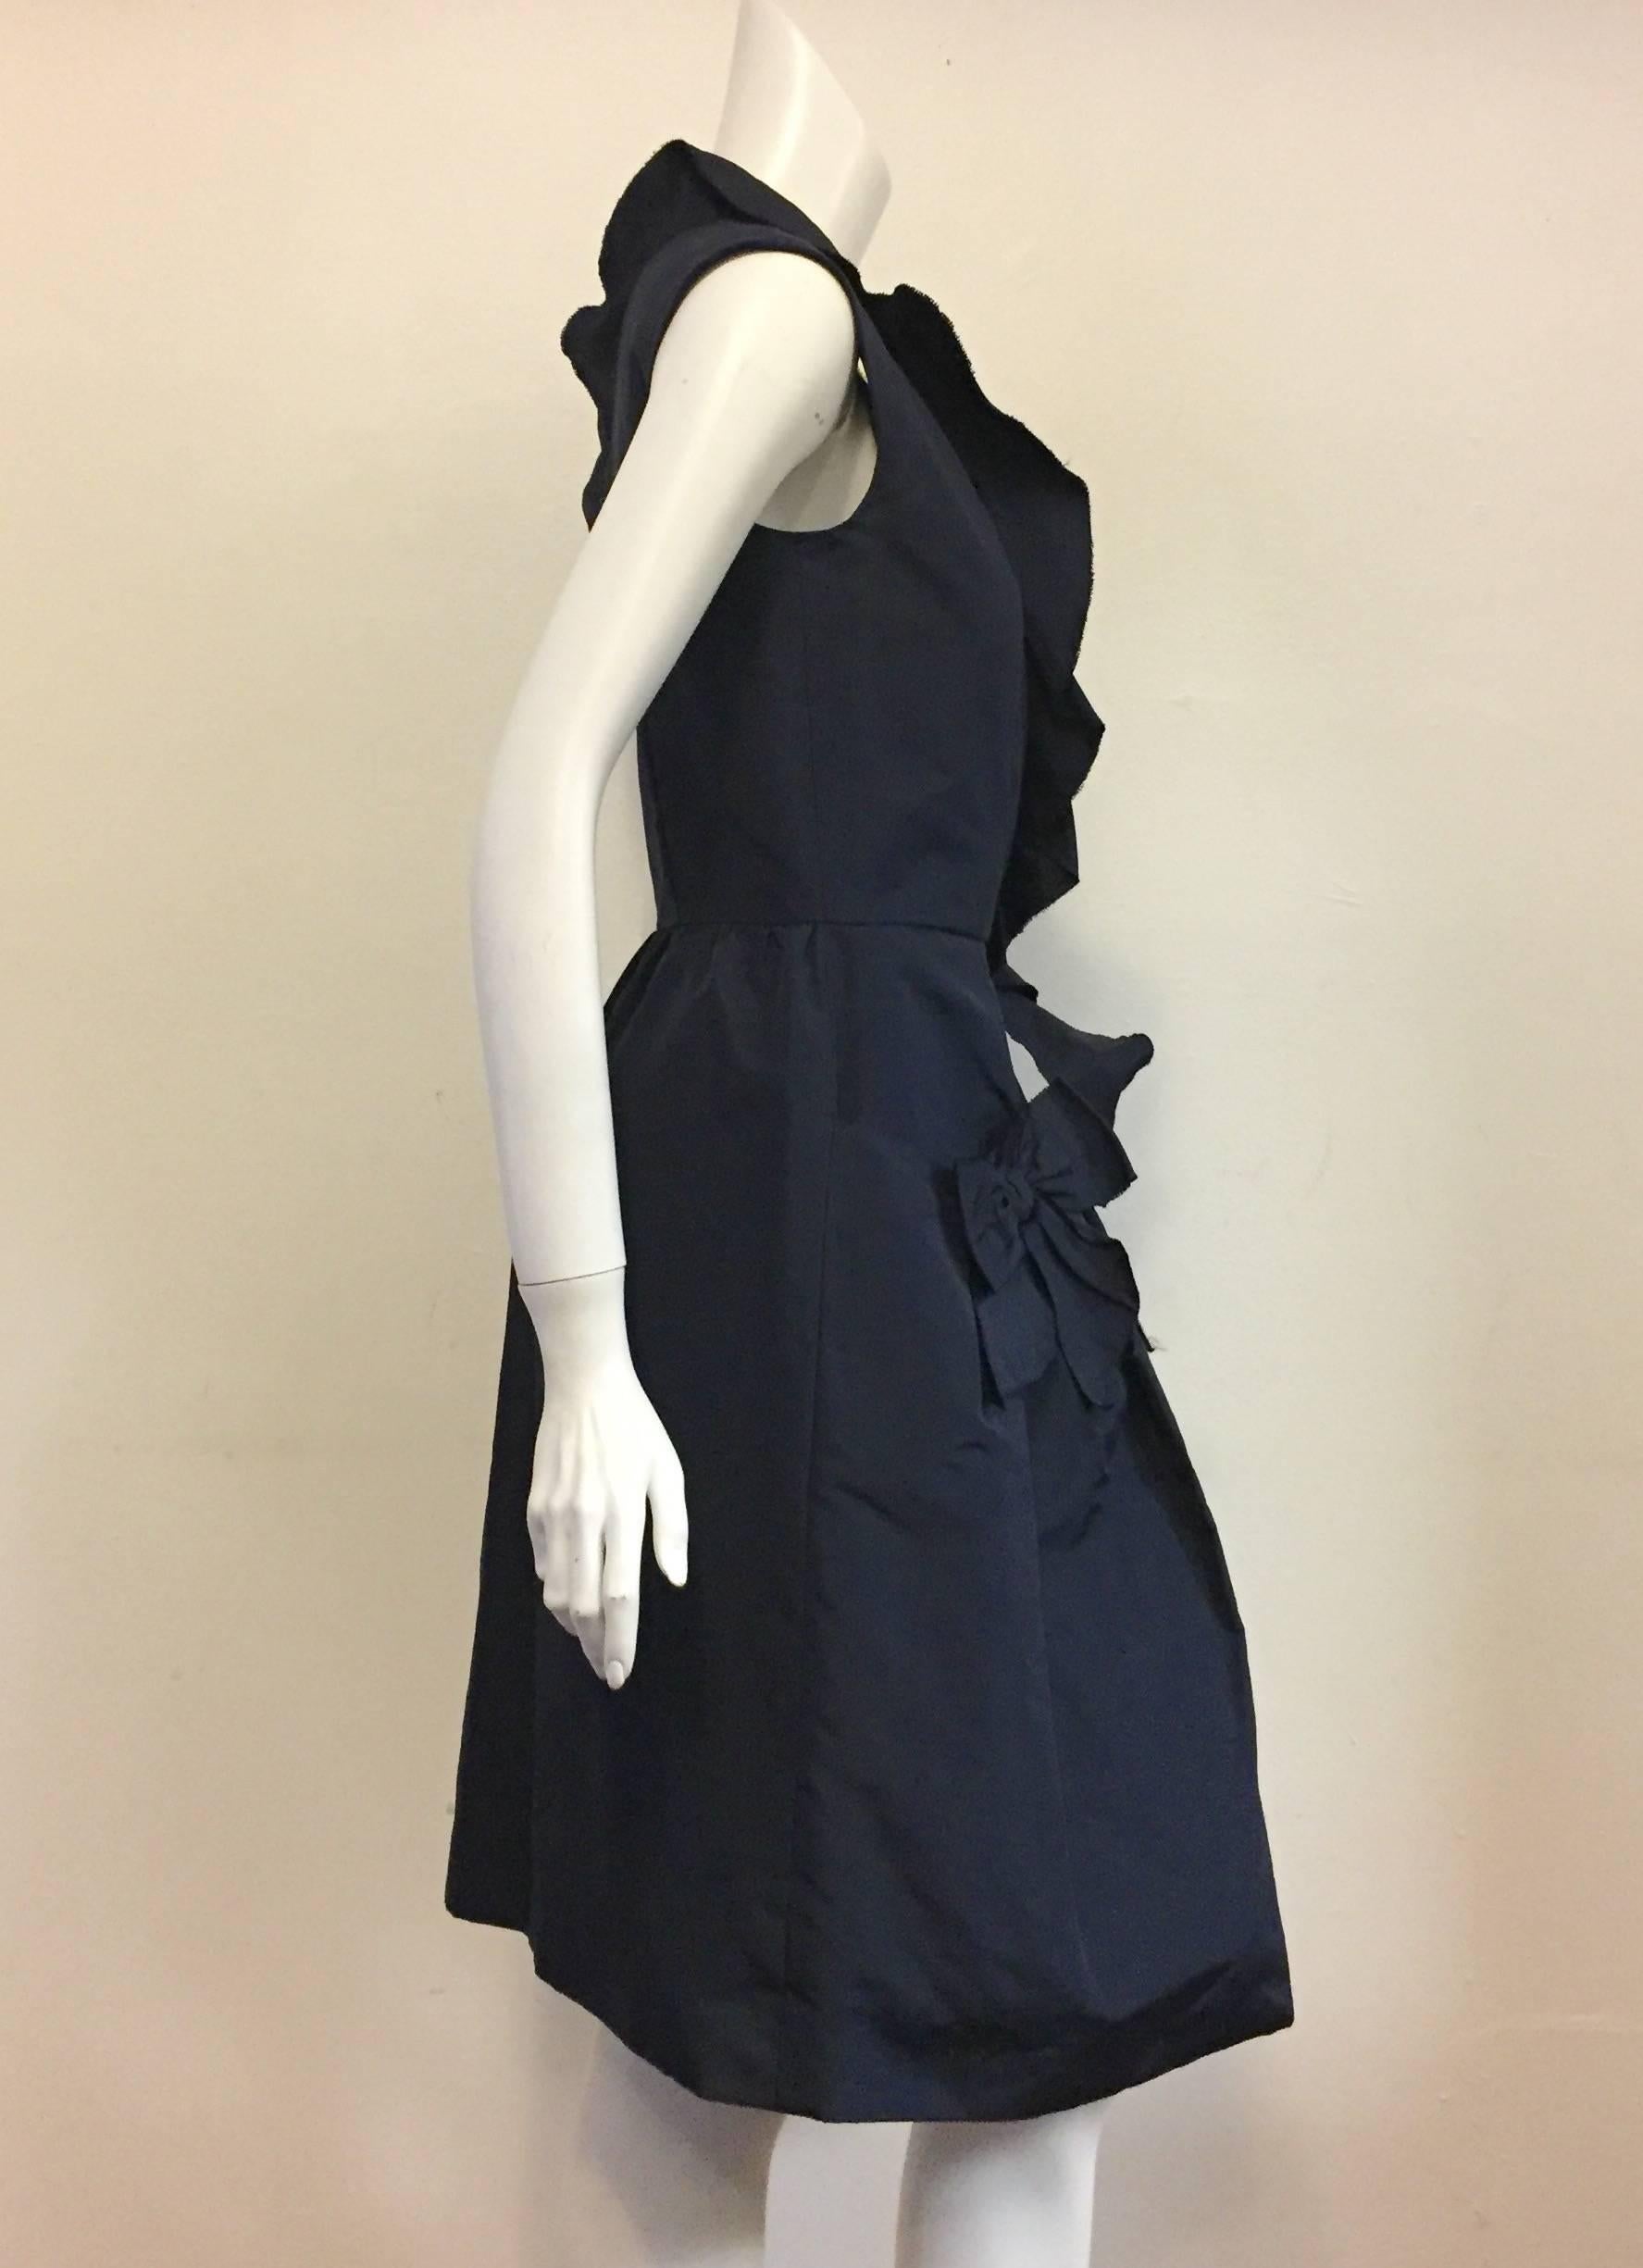 Oscar de la Renta creations are always so feminine and sophisticated they have been appreciated by aficionados for decades!  This dress speaks for itself with a deep v-neck lined with ruffles, a bow and two front pockets nodding in true homage to